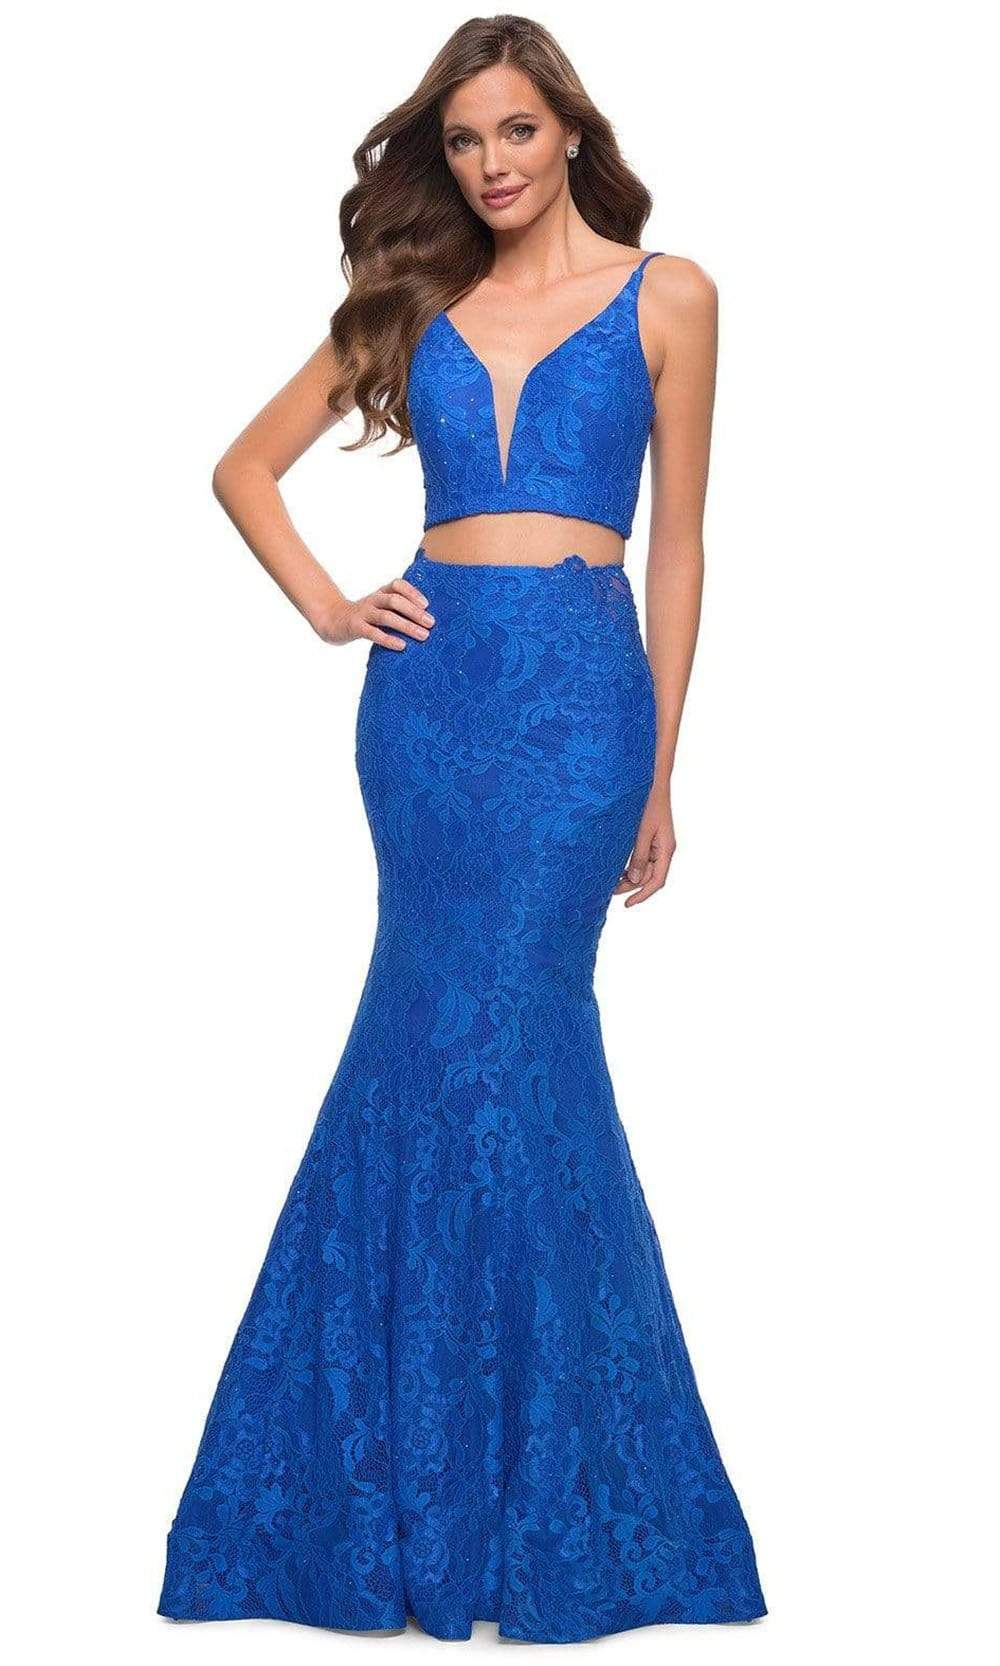 La Femme - 29970 Two Piece Plunging V Neck Mermaid Dress Special Occasion Dress 00 / Royal Blue